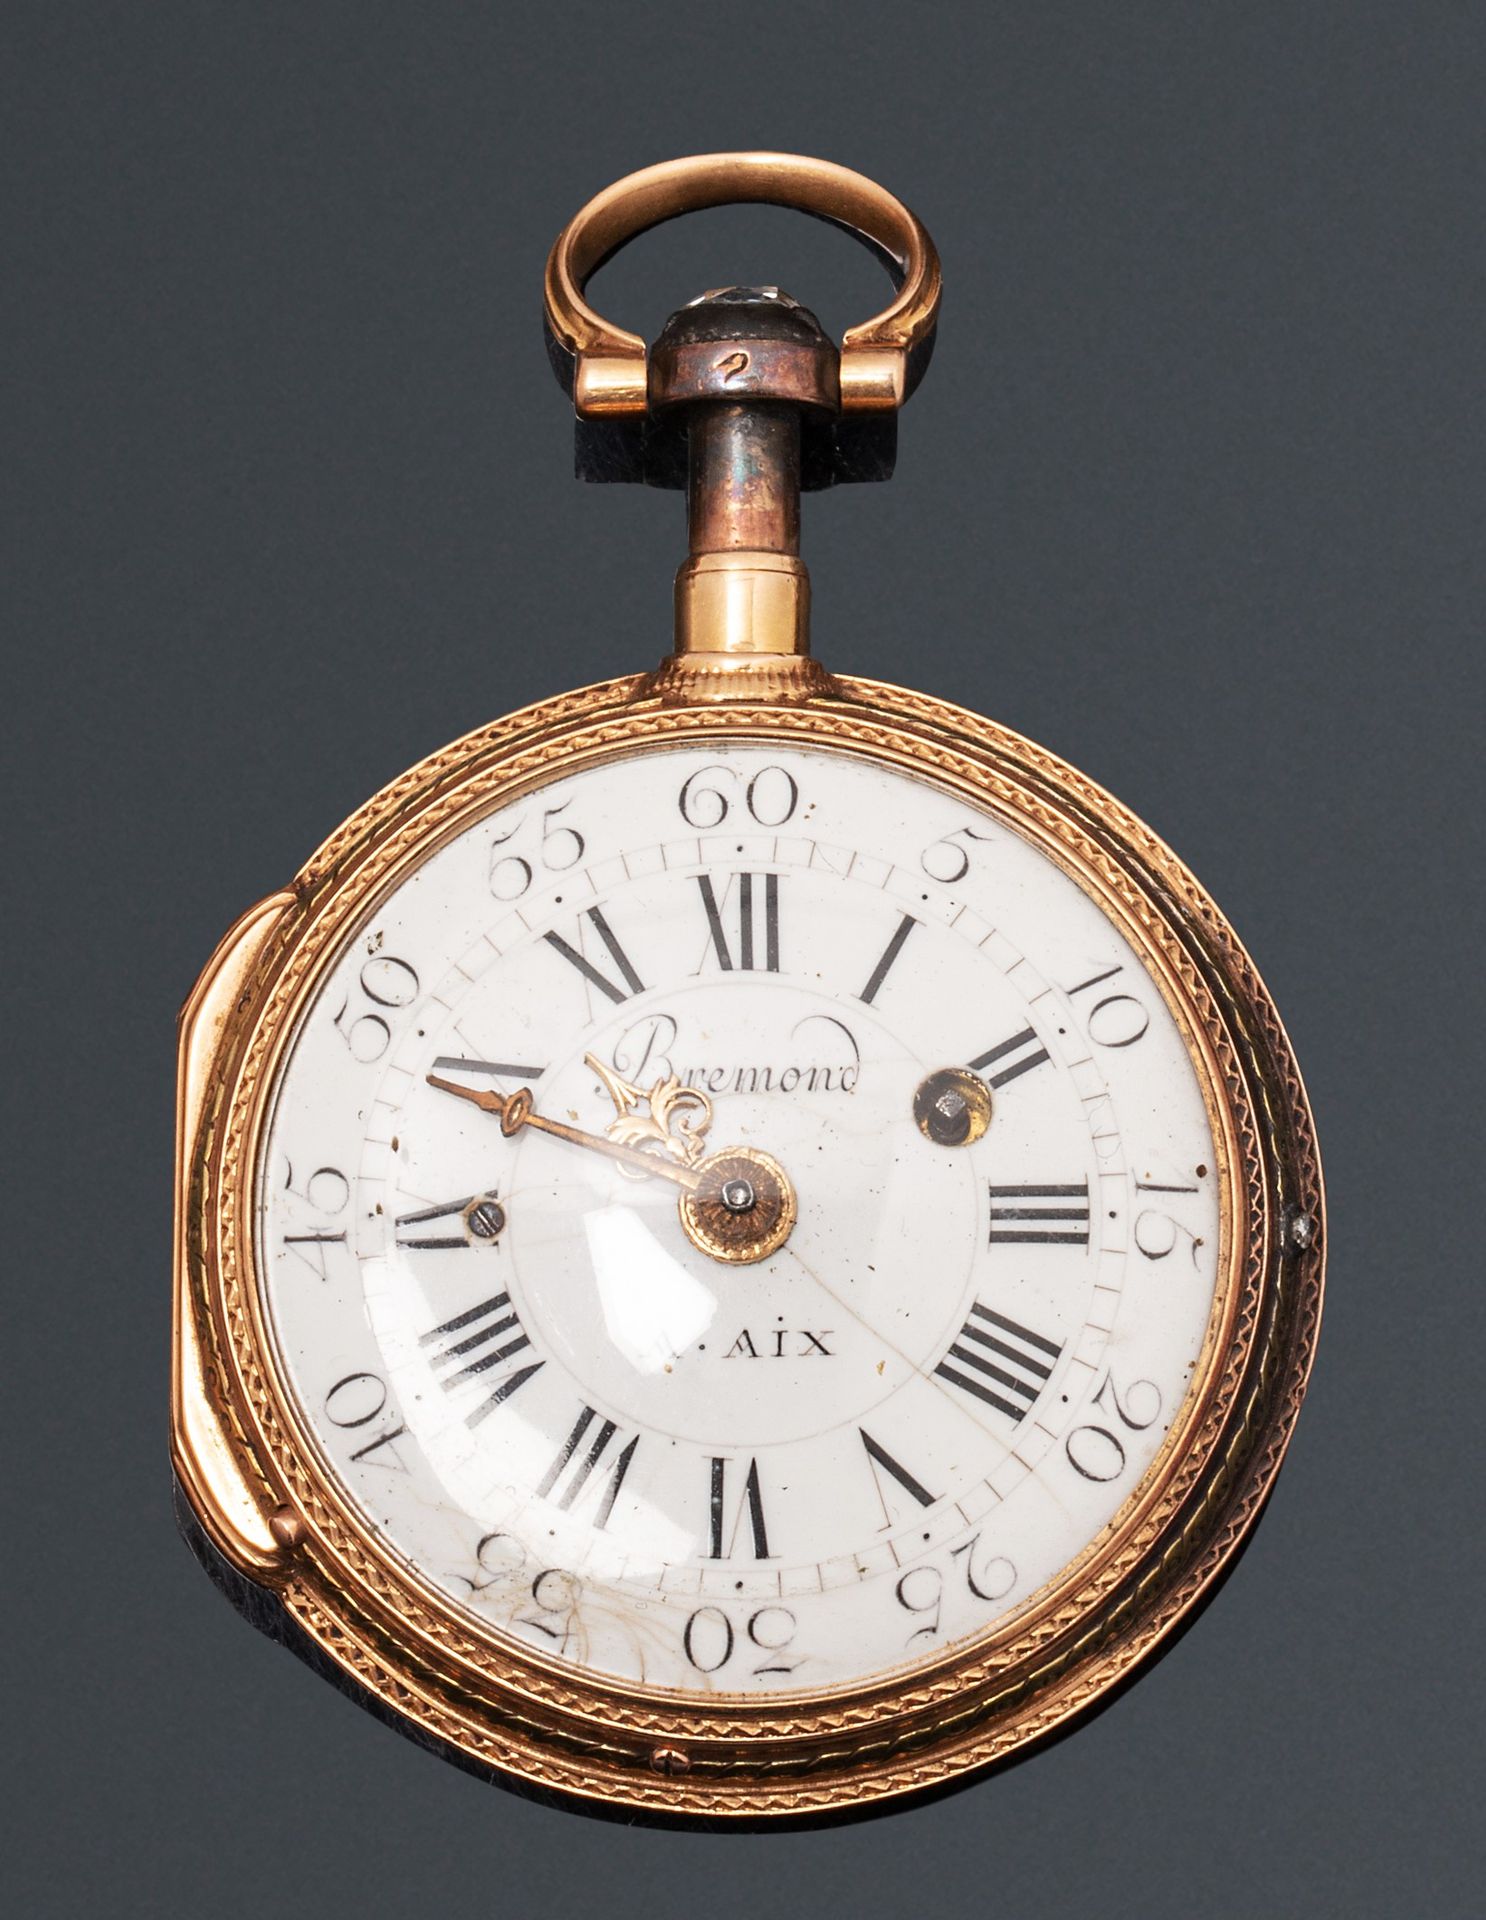 Null BREMONT in AIX

Late 18th century.

Gold watch with colored ringing. Round &hellip;